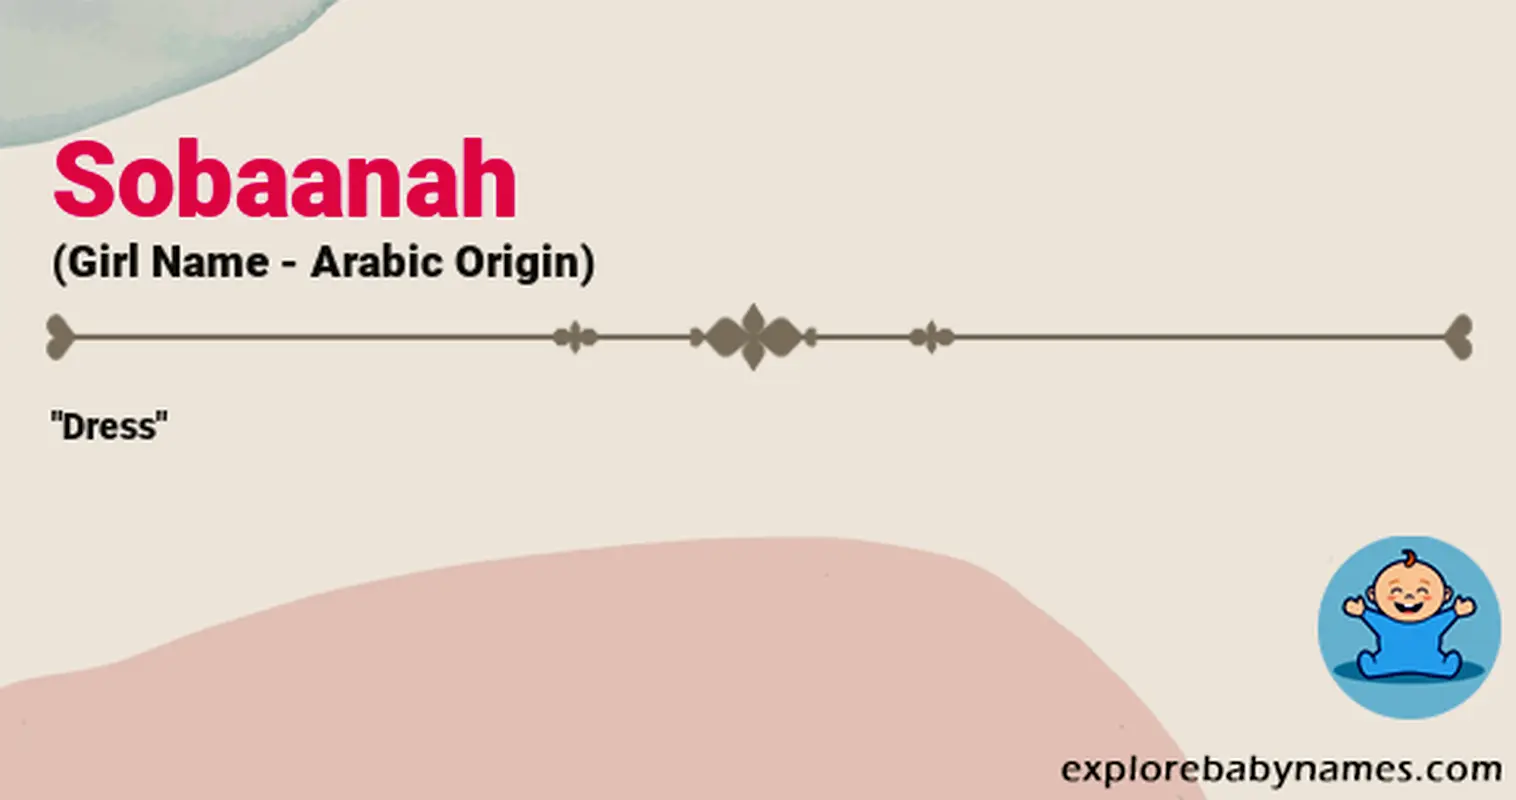 Meaning of Sobaanah